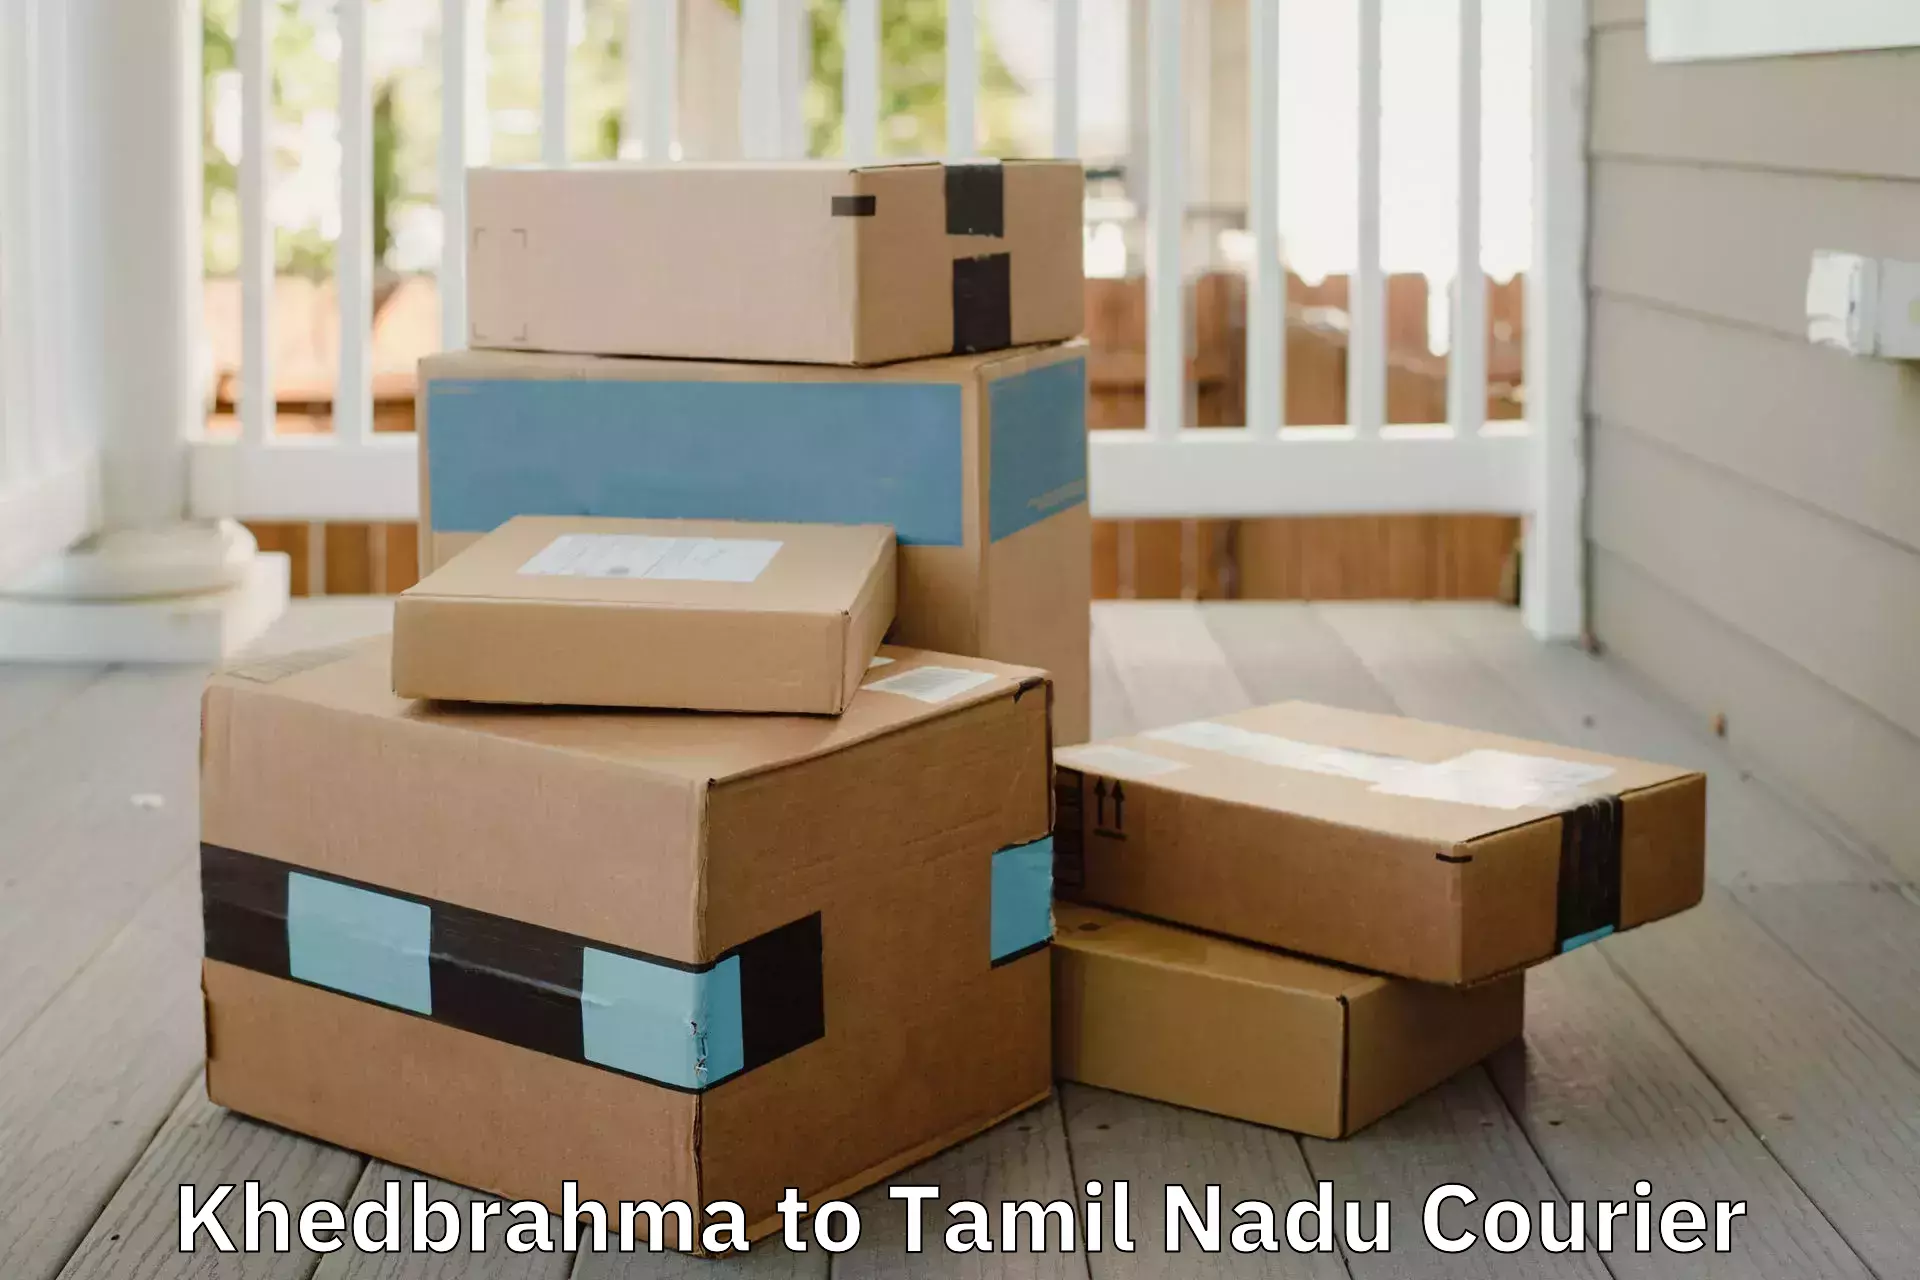 Nationwide moving services Khedbrahma to Vadipatti